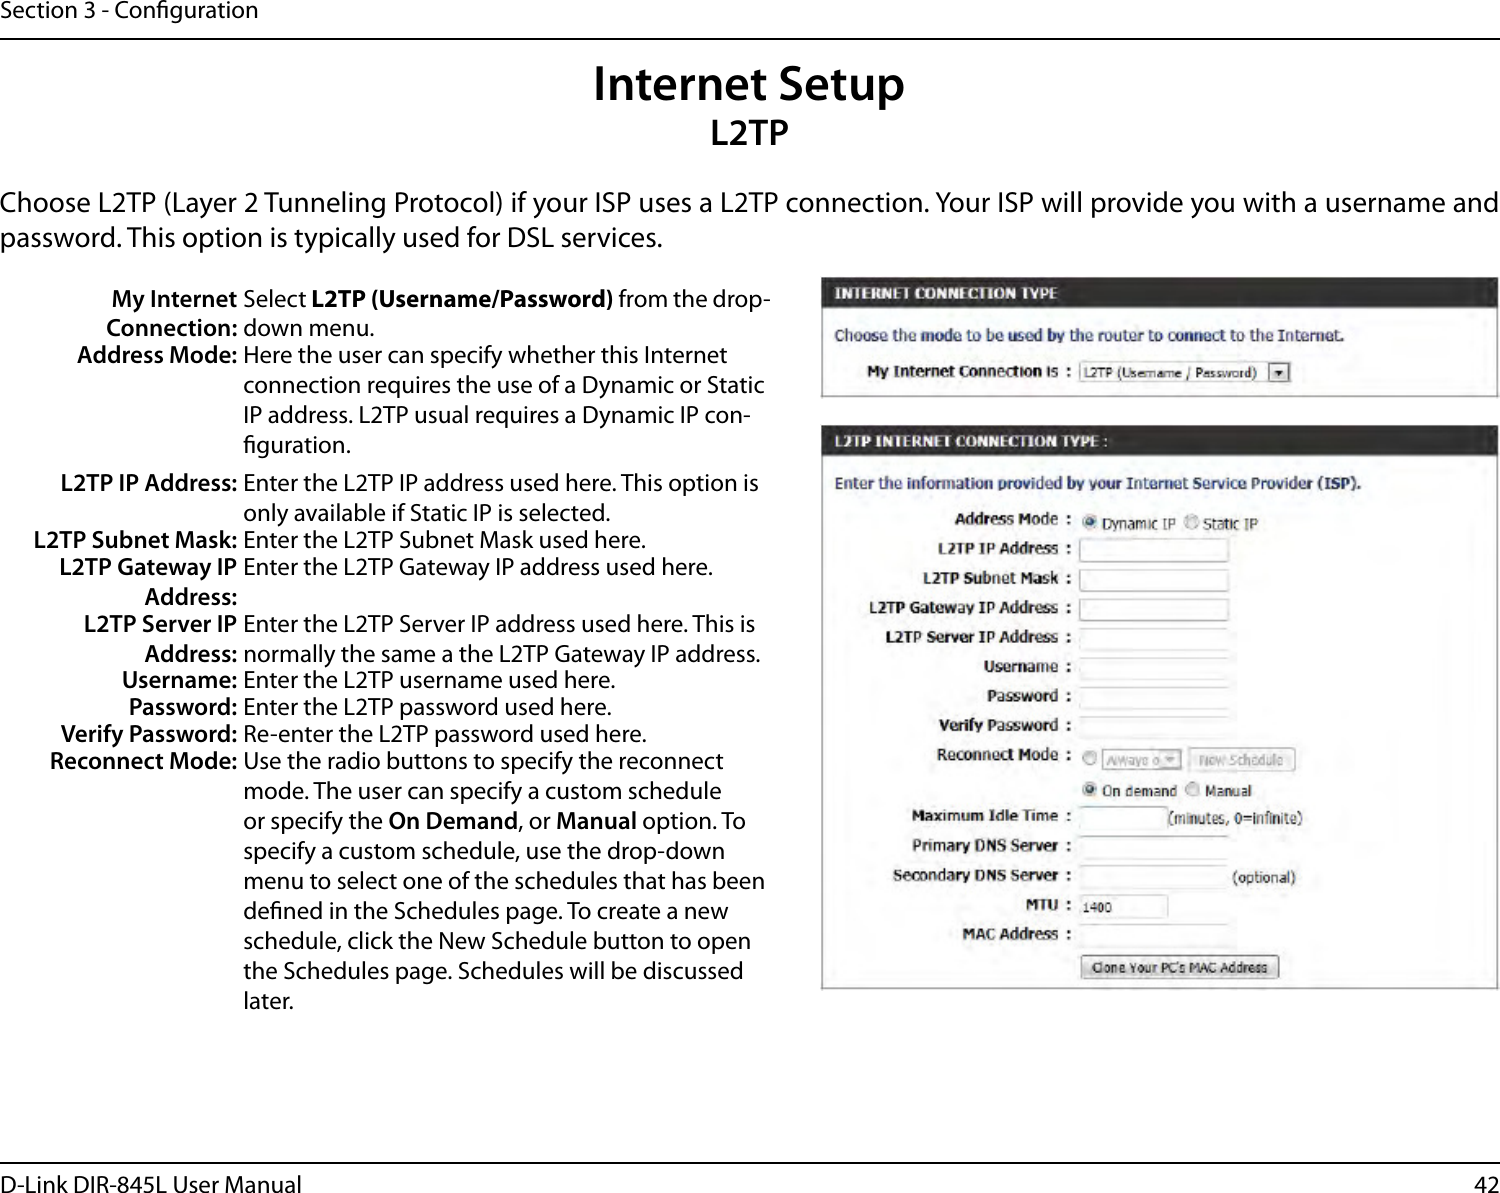 42D-Link DIR-845L User ManualSection 3 - CongurationInternet SetupL2TPChoose L2TP (Layer 2 Tunneling Protocol) if your ISP uses a L2TP connection. Your ISP will provide you with a username and password. This option is typically used for DSL services. My Internet Connection:Select L2TP (Username/Password) from the drop-down menu.Address Mode: Here the user can specify whether this Internet connection requires the use of a Dynamic or Static IP address. L2TP usual requires a Dynamic IP con-guration.L2TP IP Address: Enter the L2TP IP address used here. This option is only available if Static IP is selected.L2TP Subnet Mask: Enter the L2TP Subnet Mask used here.L2TP Gateway IP Address:Enter the L2TP Gateway IP address used here.L2TP Server IP Address:Enter the L2TP Server IP address used here. This is normally the same a the L2TP Gateway IP address.Username: Enter the L2TP username used here.Password: Enter the L2TP password used here.Verify Password: Re-enter the L2TP password used here.Reconnect Mode: Use the radio buttons to specify the reconnect mode. The user can specify a custom schedule or specify the On Demand, or Manual option. To specify a custom schedule, use the drop-down menu to select one of the schedules that has been dened in the Schedules page. To create a new schedule, click the New Schedule button to open the Schedules page. Schedules will be discussed later.